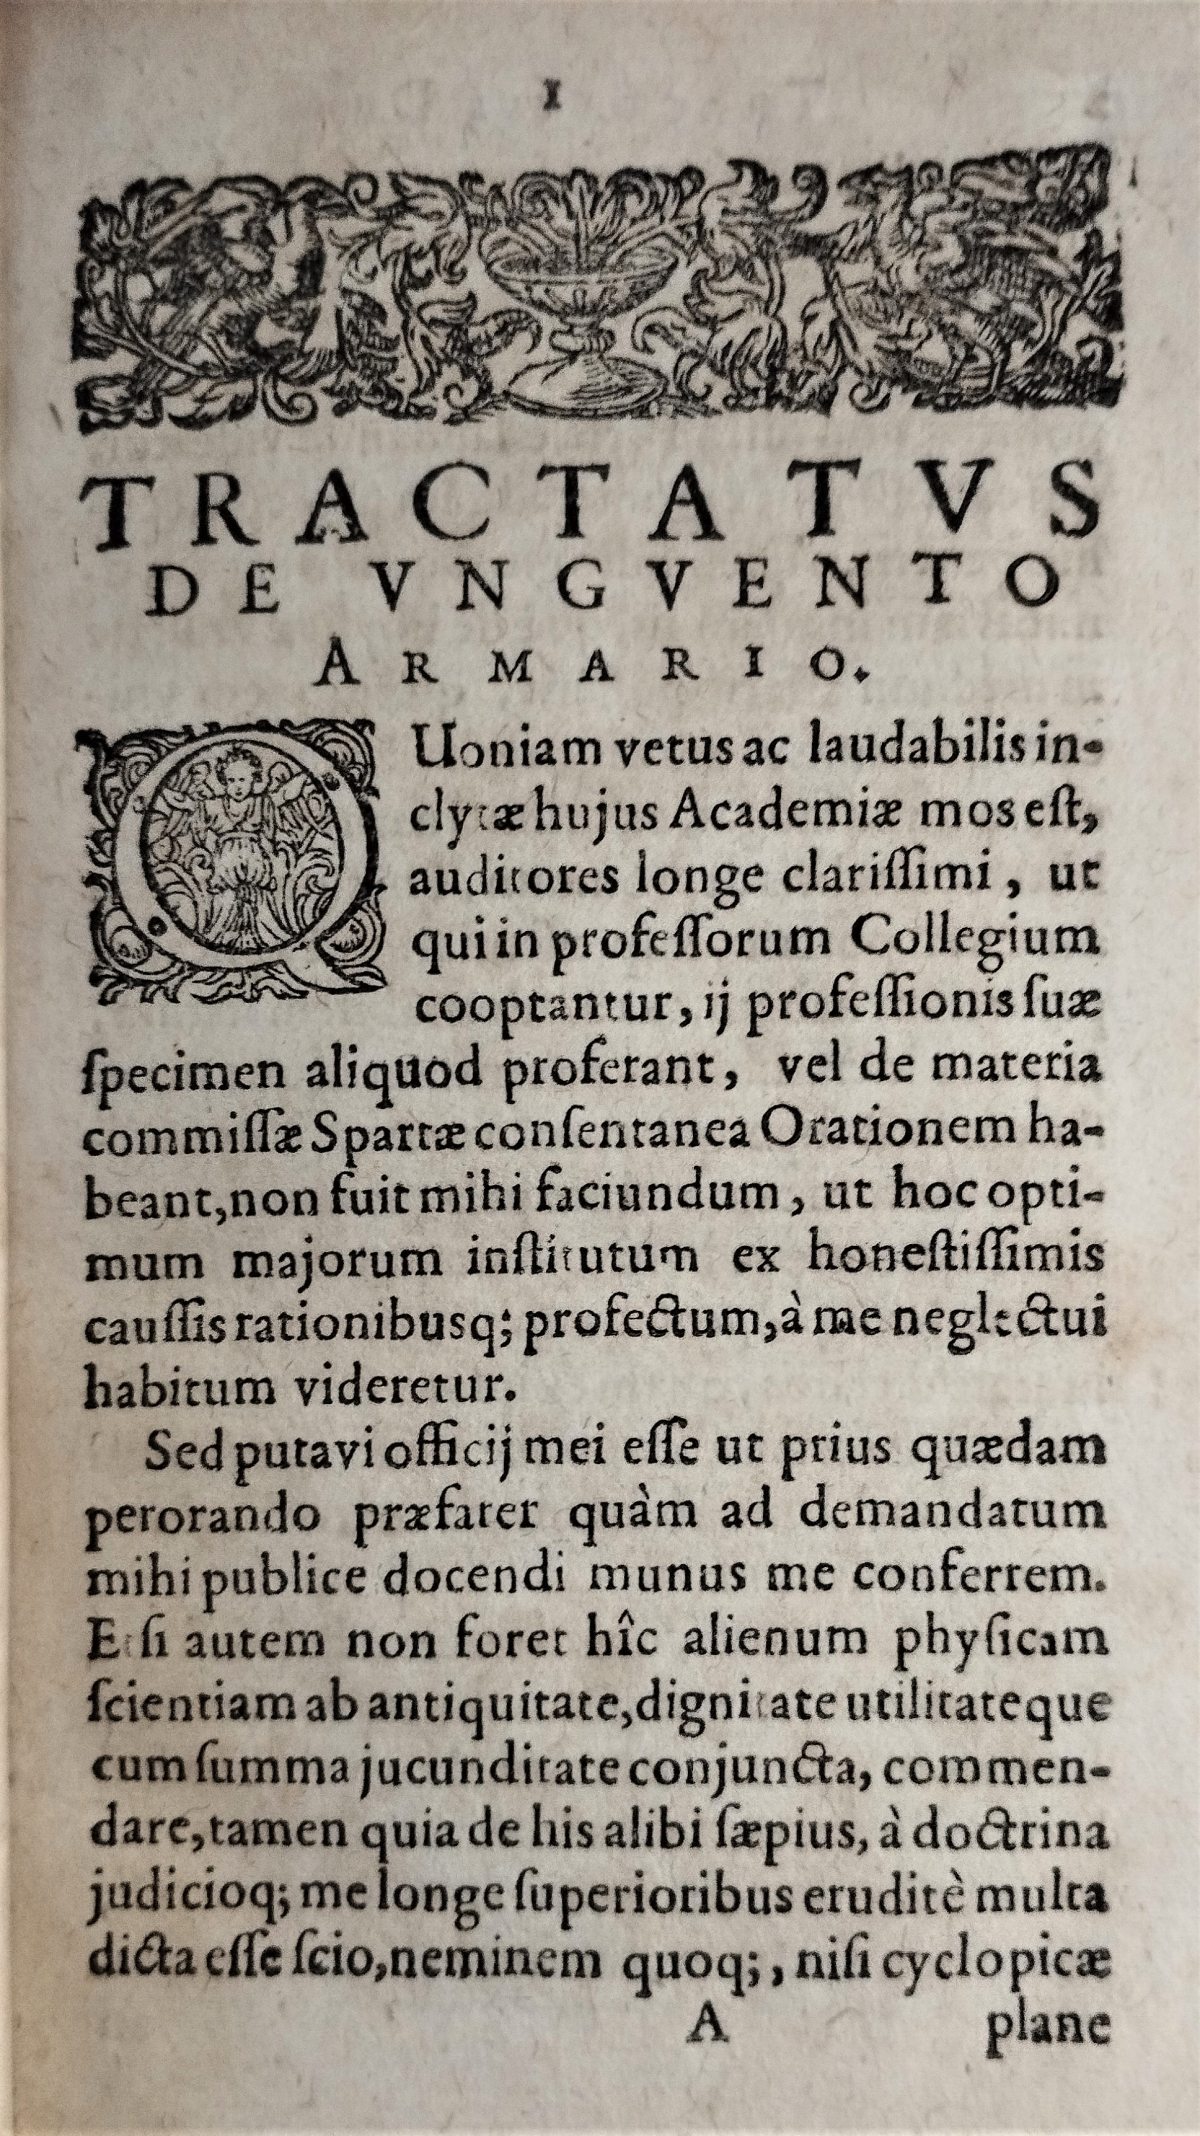 Page 1 in a 17th-century printed book, with a decorative woodcut above Latin text headed 'Tractatus de unguento armario'.